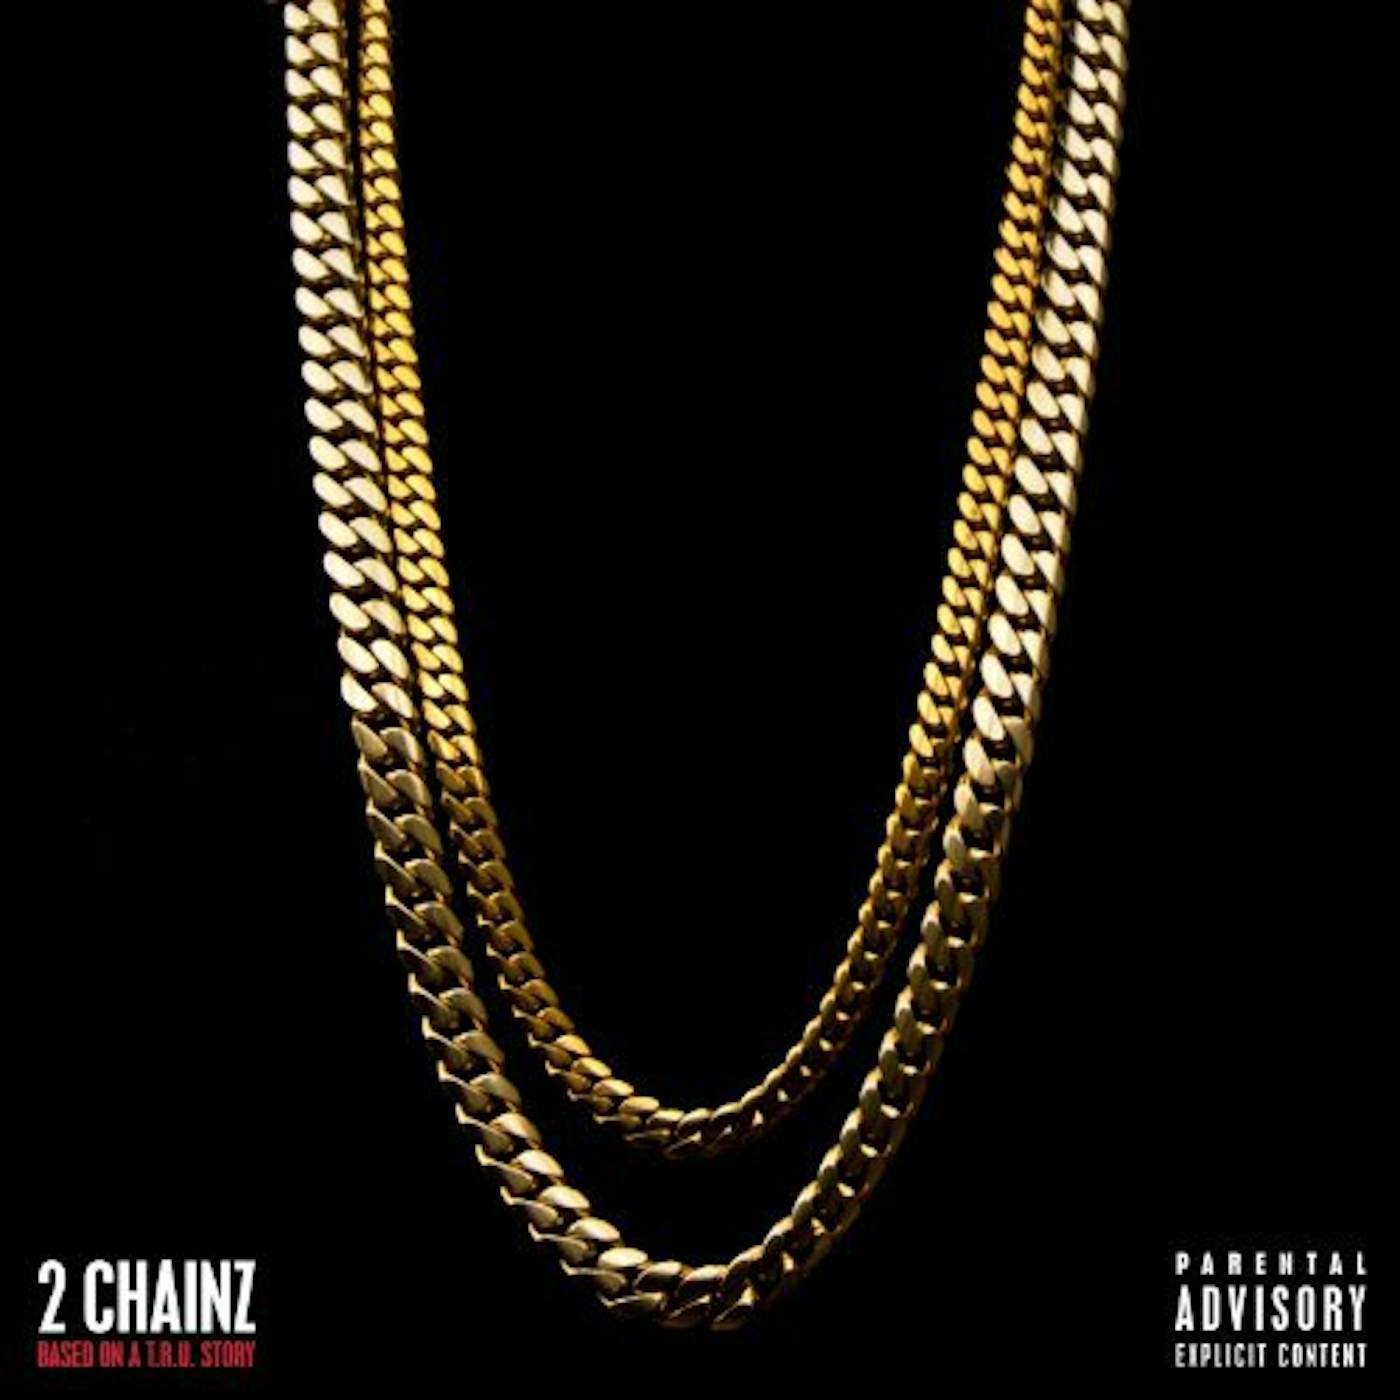 2 Chainz Based On A T.R.U. Story Vinyl Record